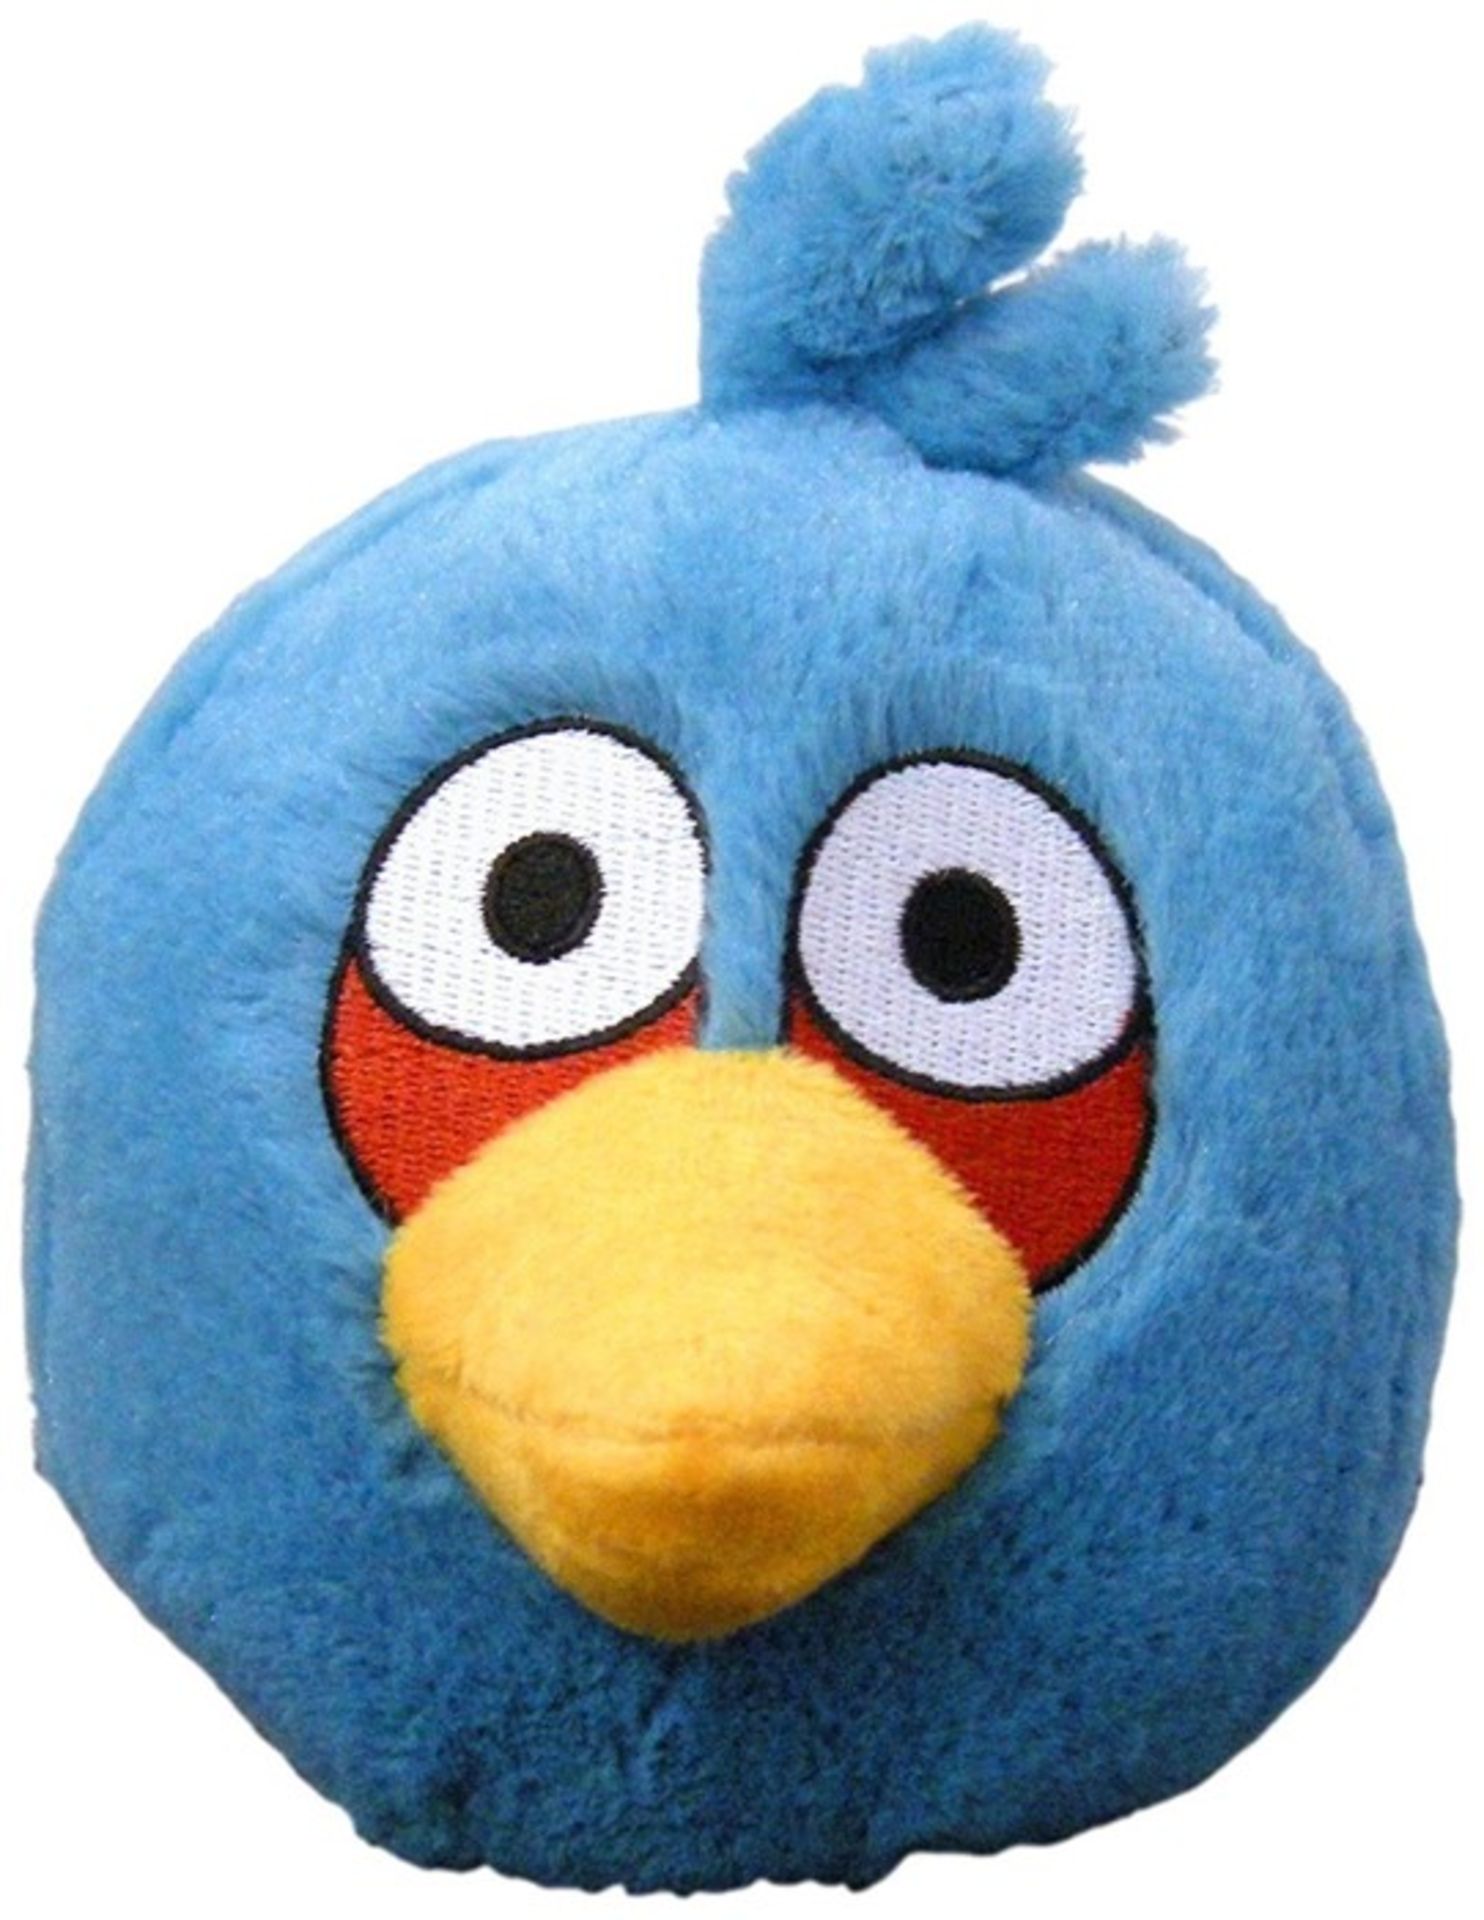 1 ANGRY BIRDS CUDDLY PLUSH TOY - BLUE BIRD 8" / RRP £7.49 (VIEWING HIGHLY RECOMMENDED)